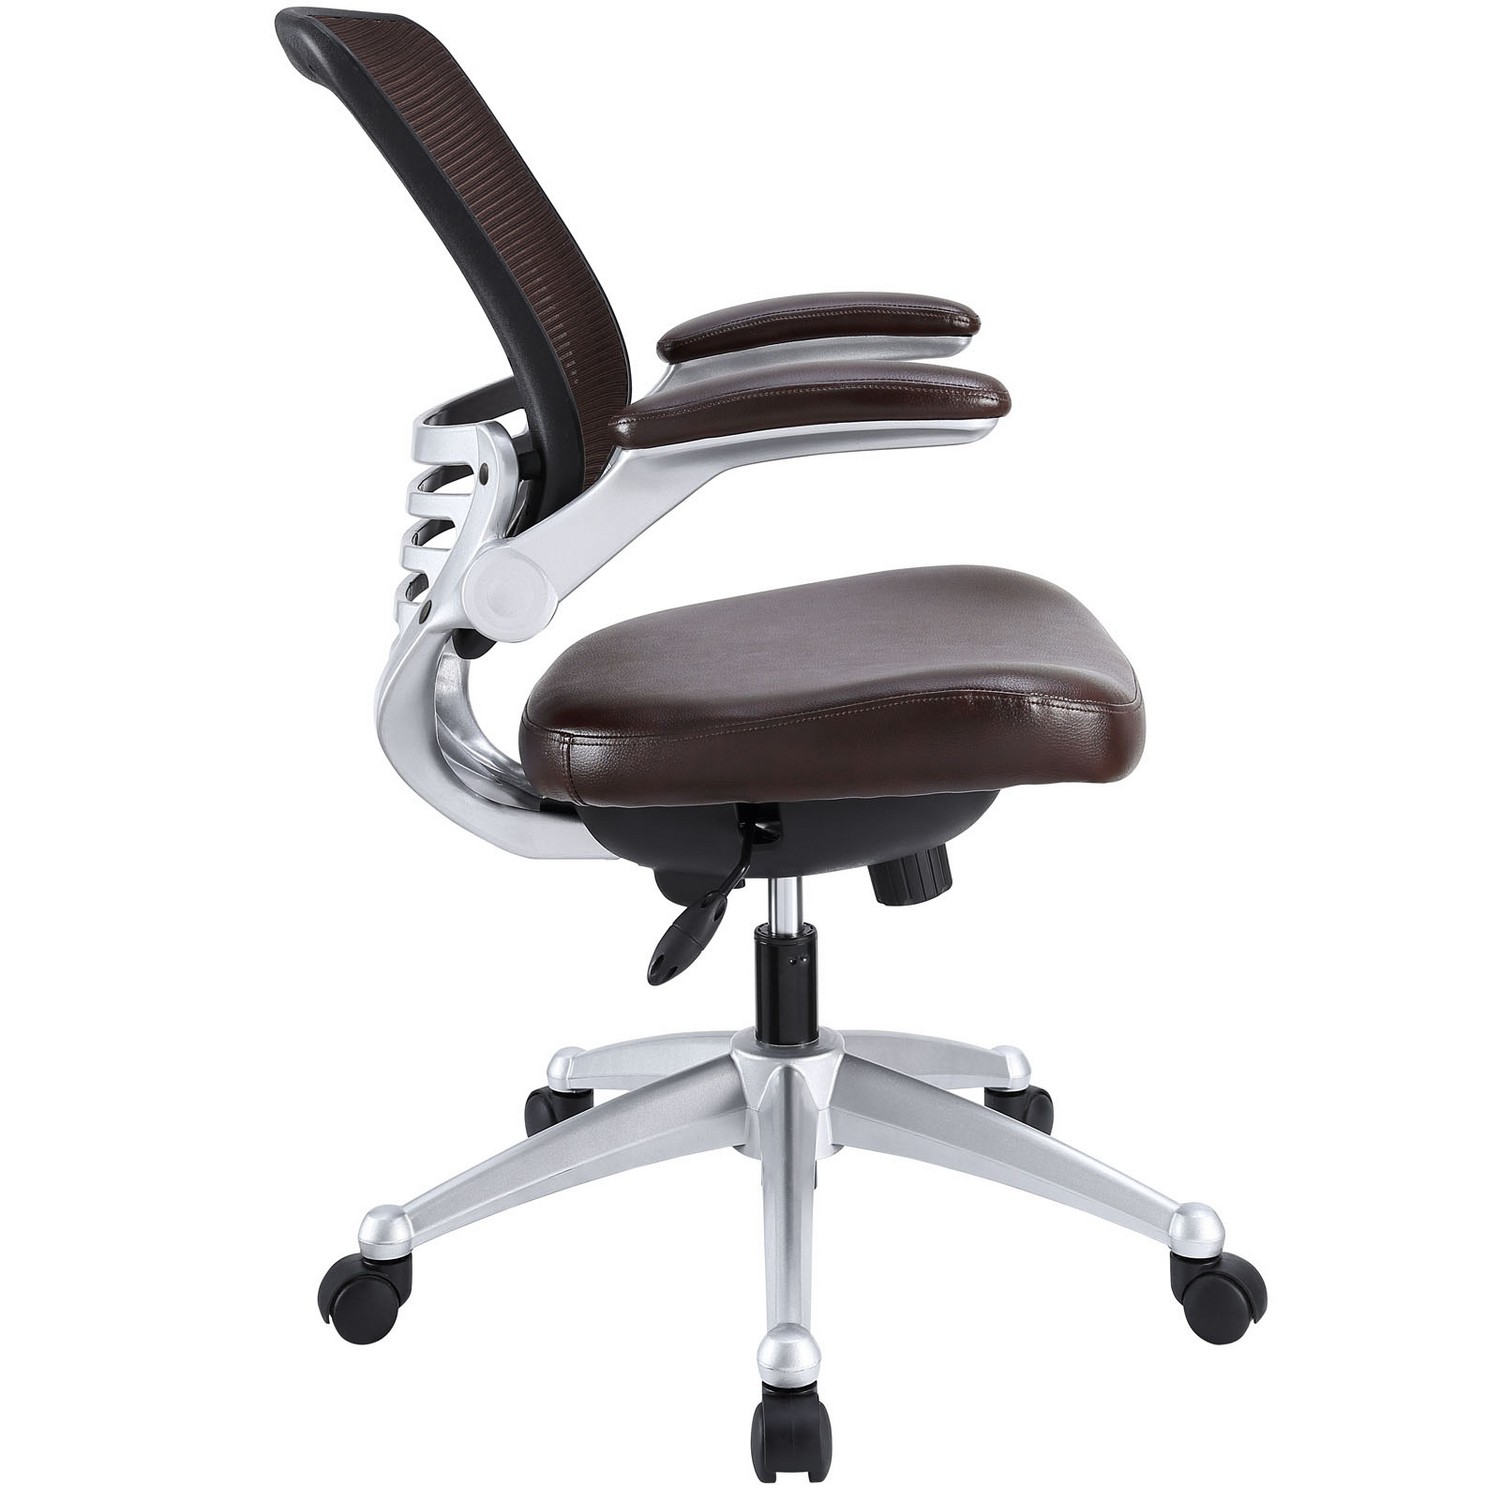 Modway Edge Leather Office Chair - Brown